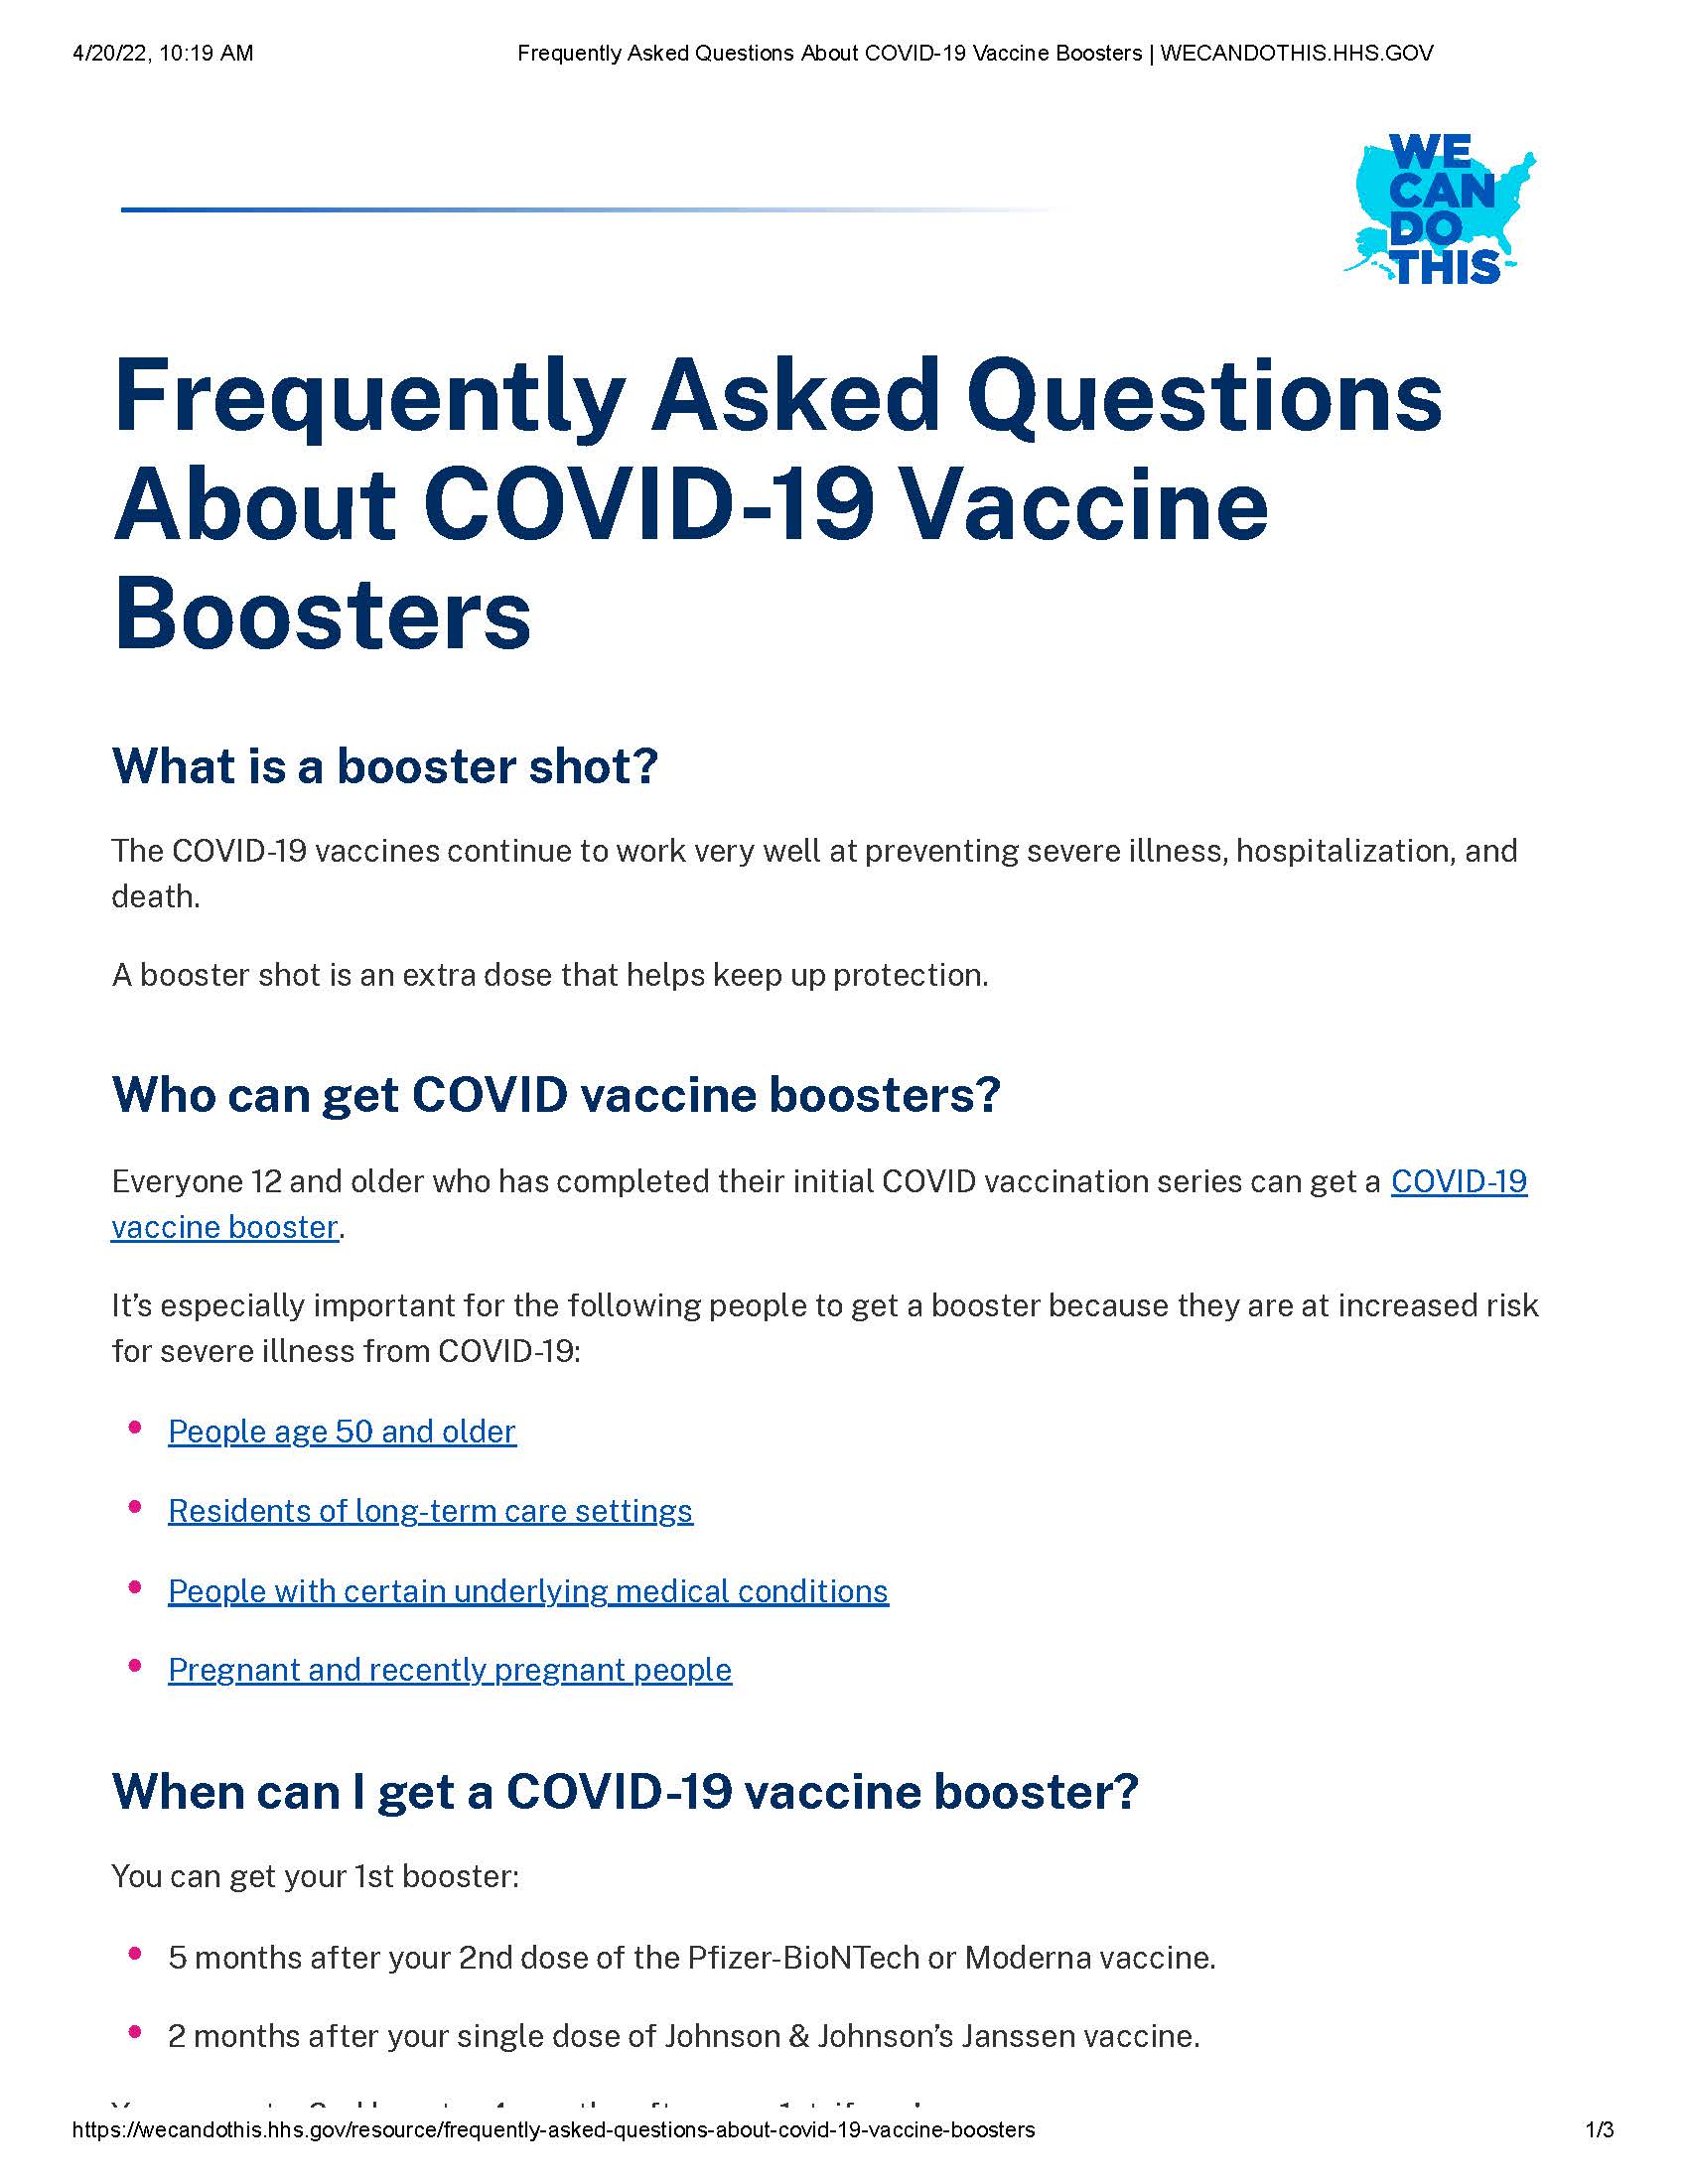 Frequently Asked Questions About COVID-19 Vaccine Boosters _ WECANDOTHIS.HHS.GOV_Page_1